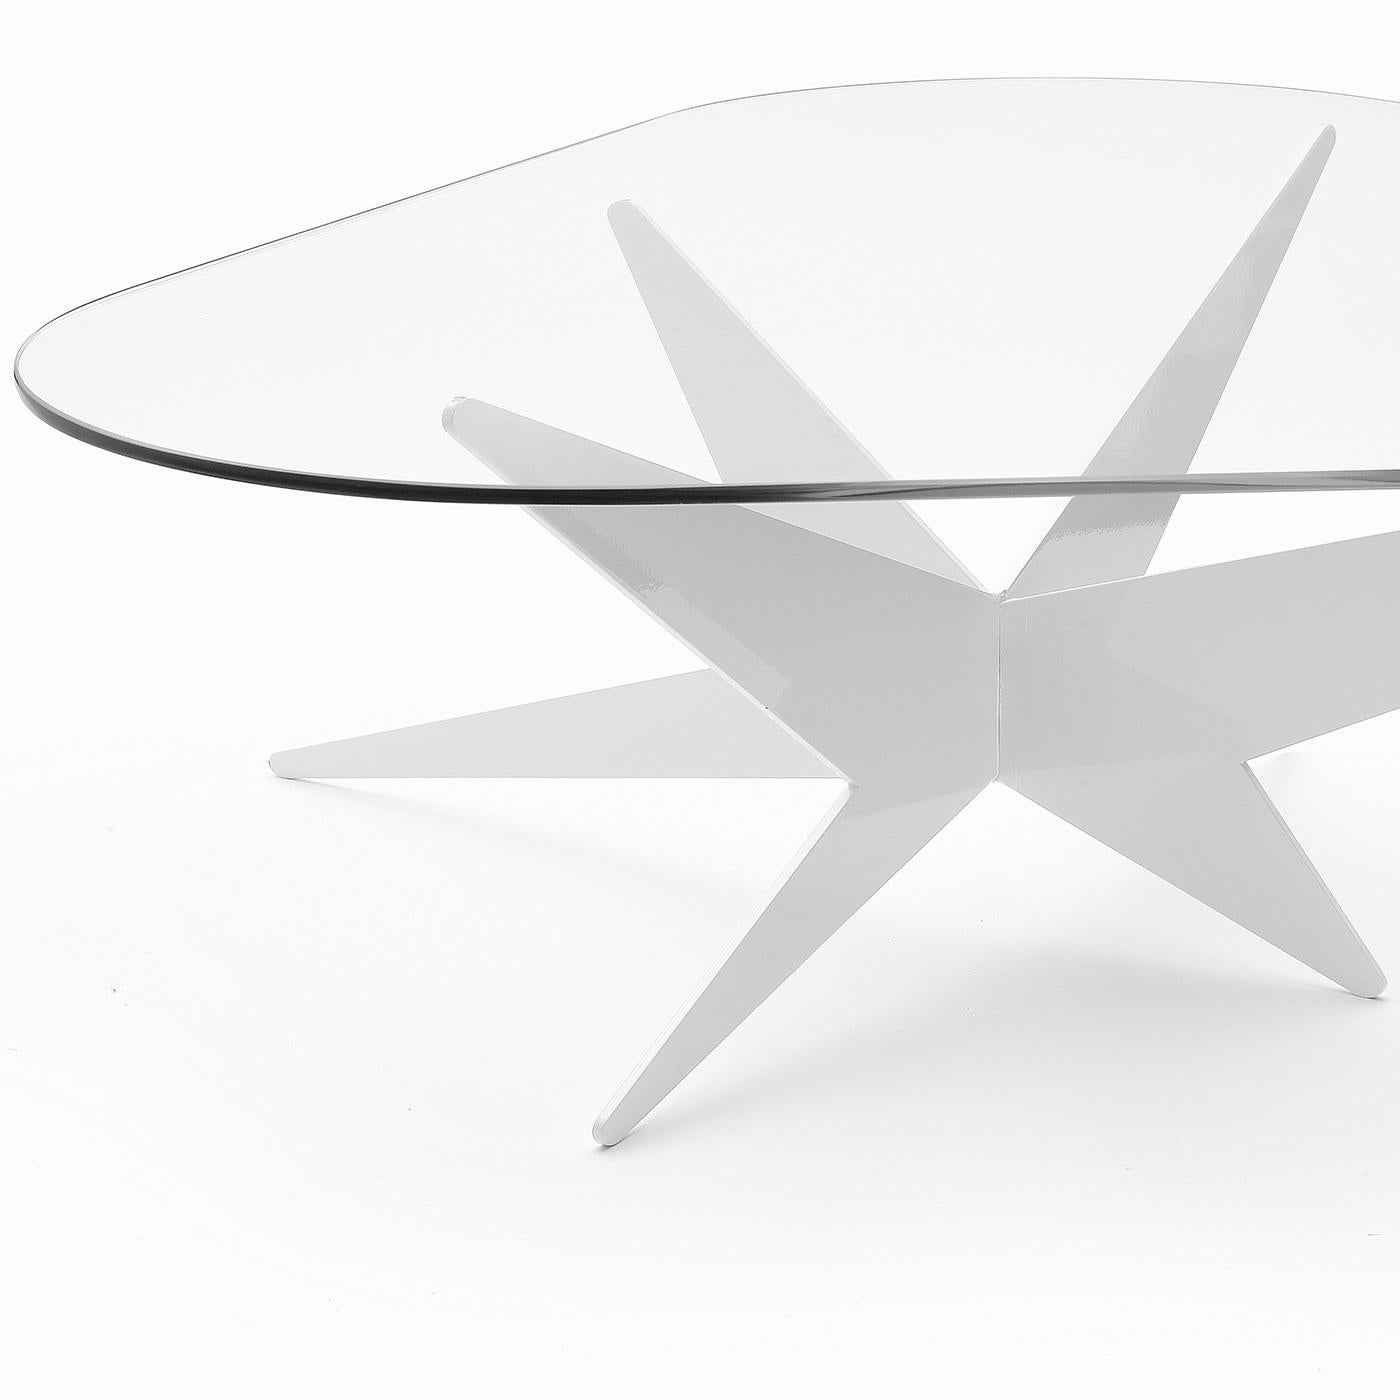 Inspired by the timeless elegance of the stars, this coffee table designed by Antonio Pio Saracino features a satin-finished aluminum base holding a triangular glass tabletop. The three-dimensional, starburst shape boasts eight rays radiating from